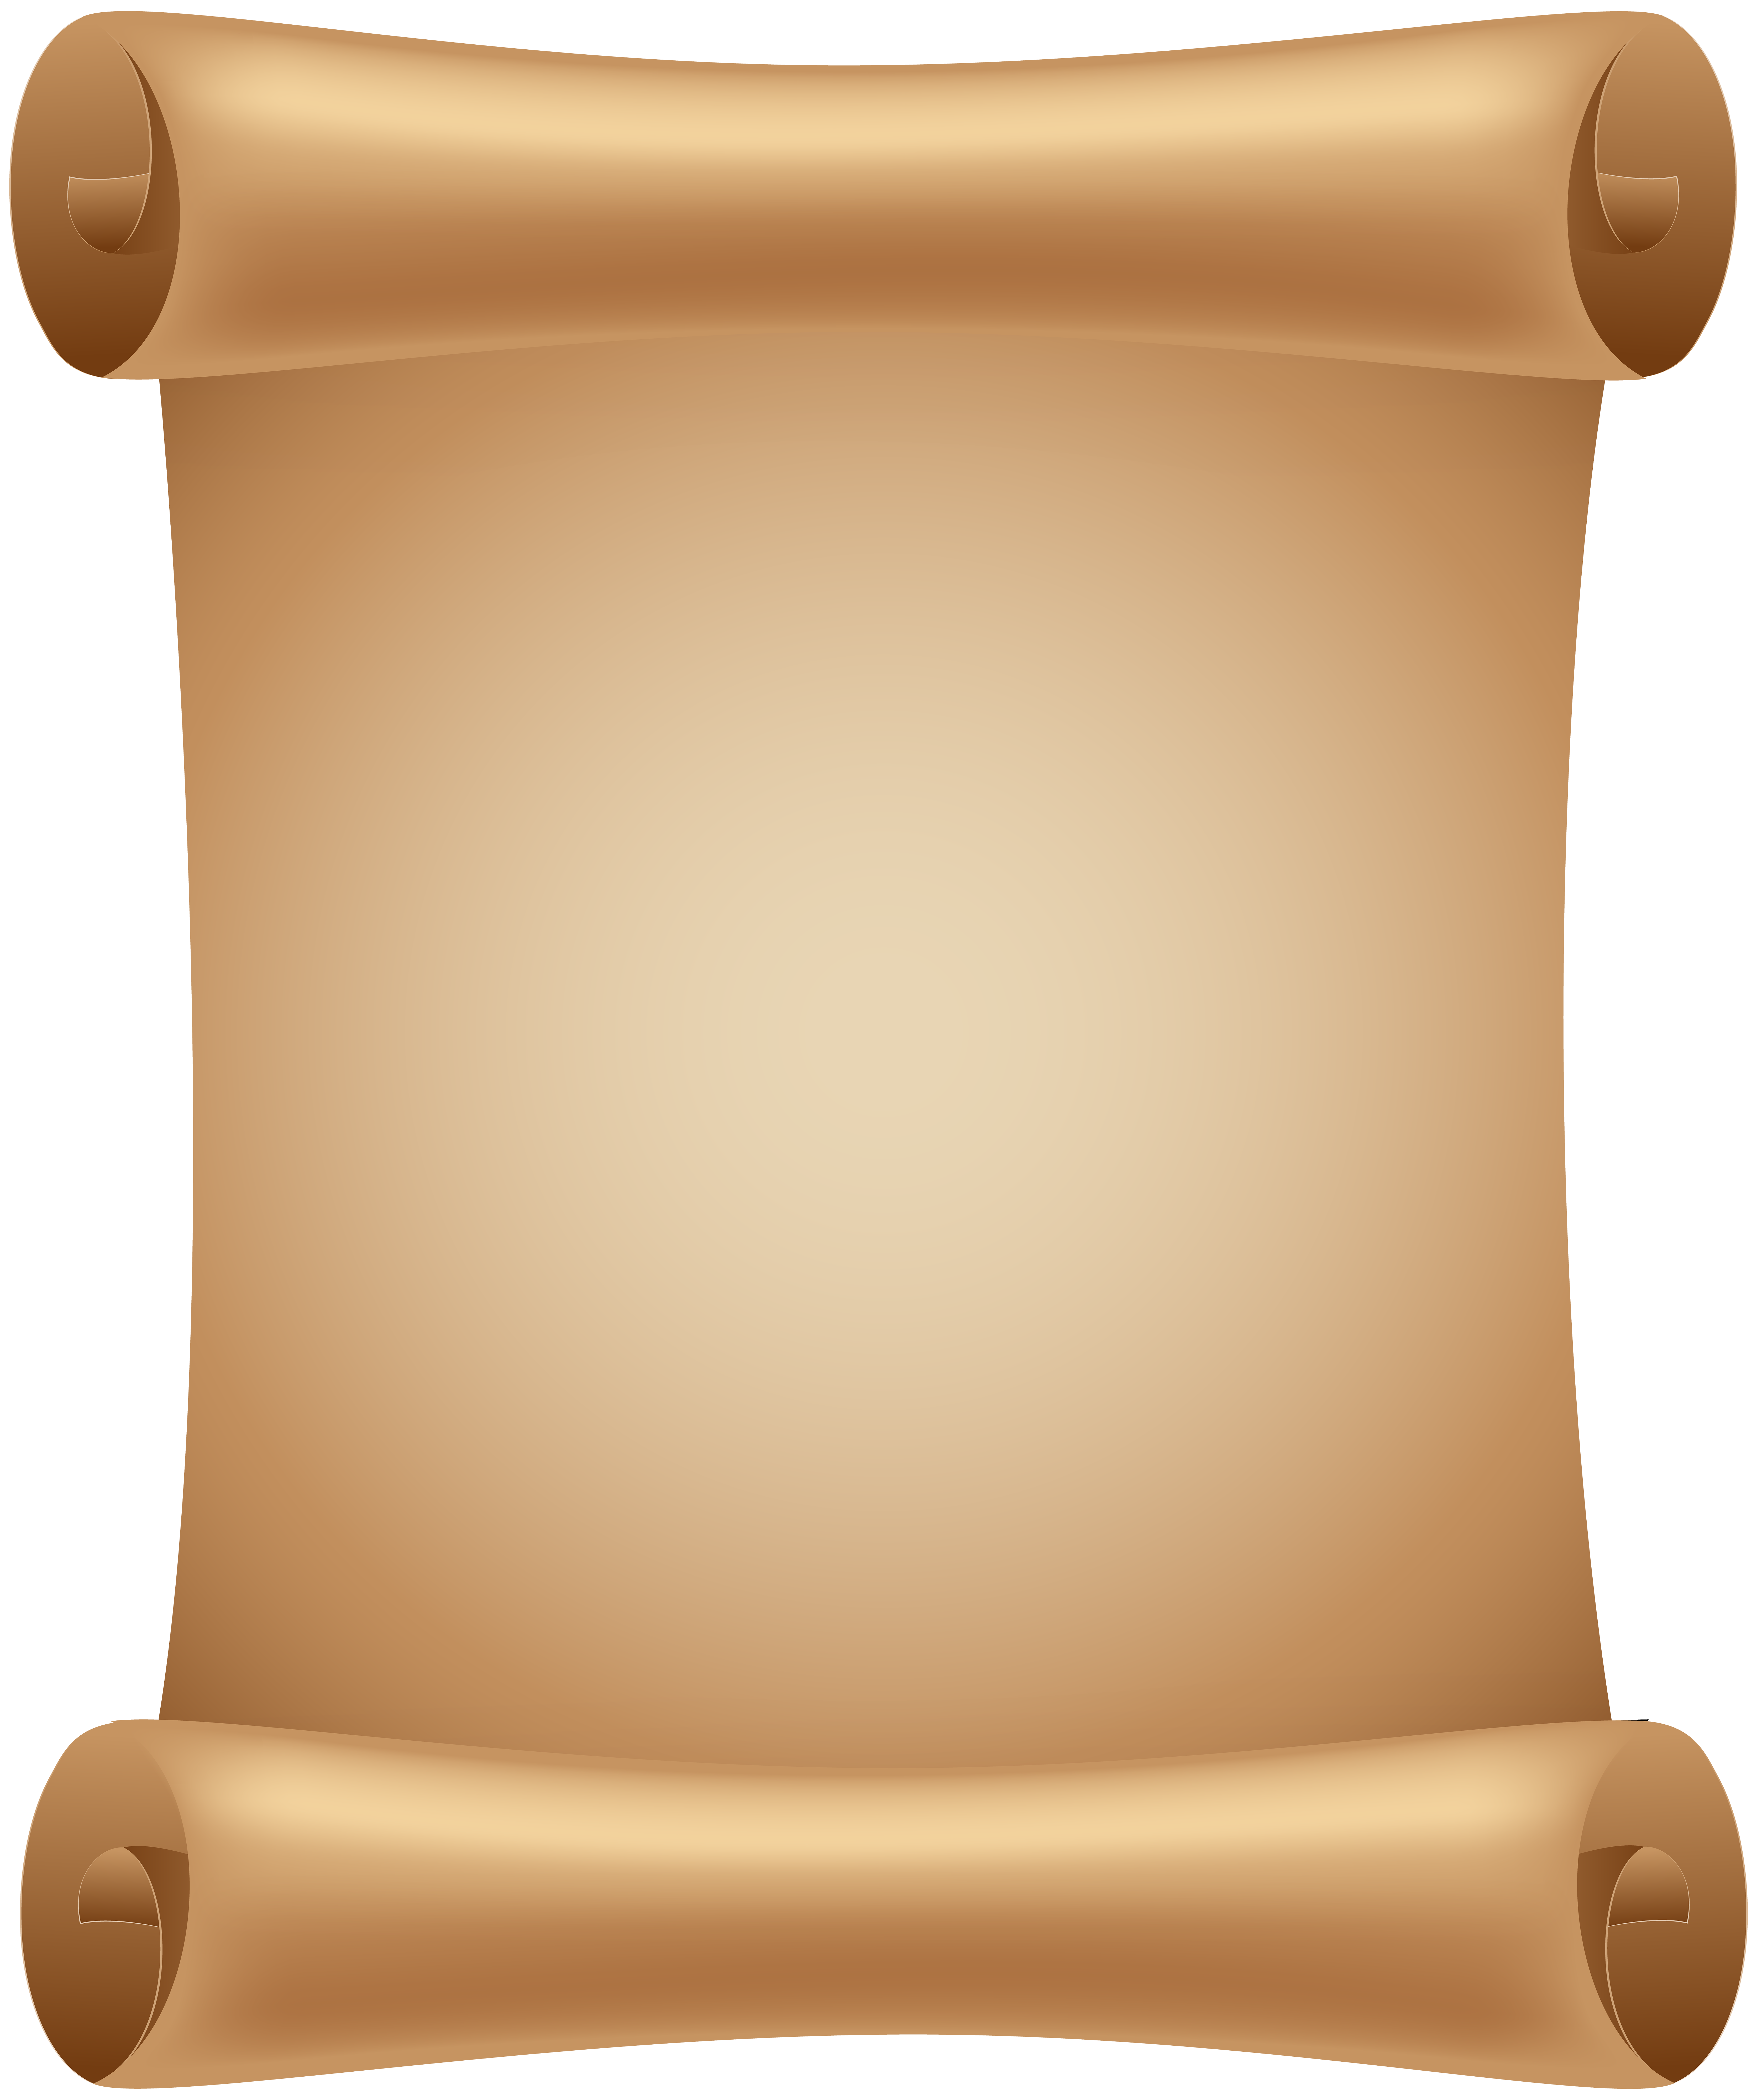 Scroll PNG Clip Art Image.